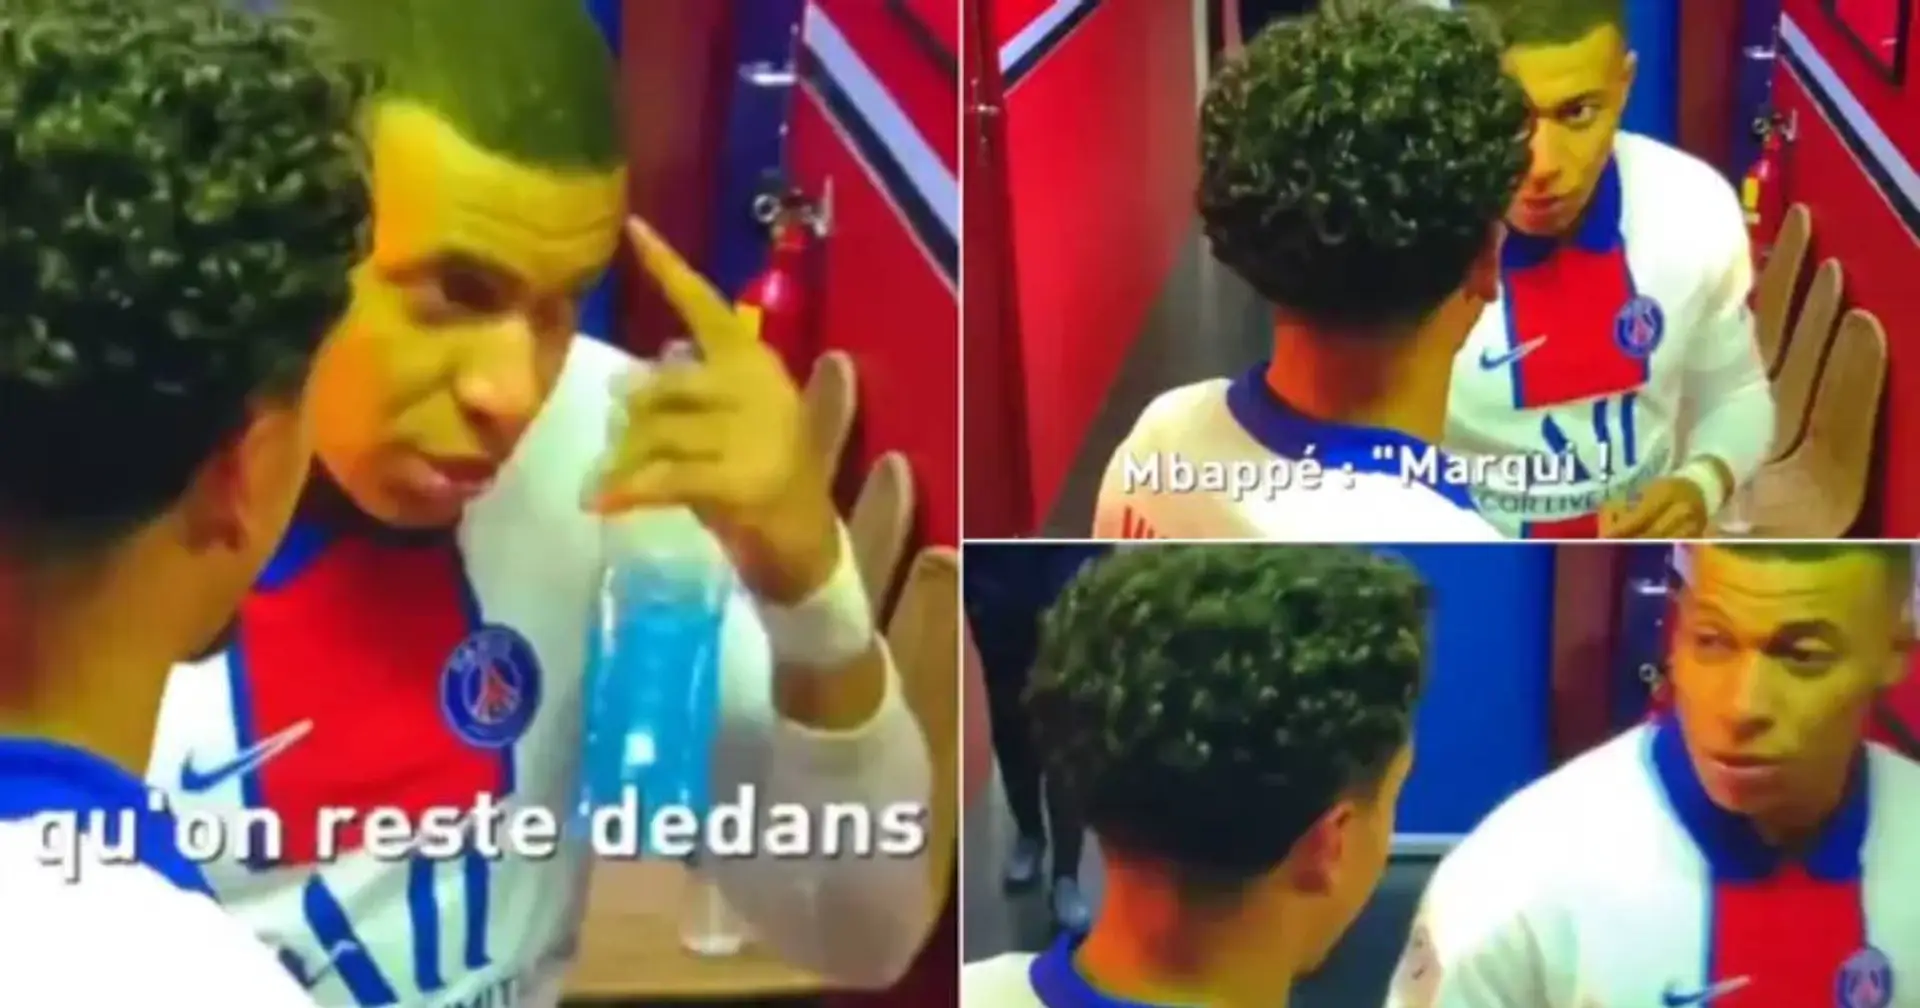 Cameras caught Mbappe's speech to teammates, proved he already has elite 'CR7 mentality'